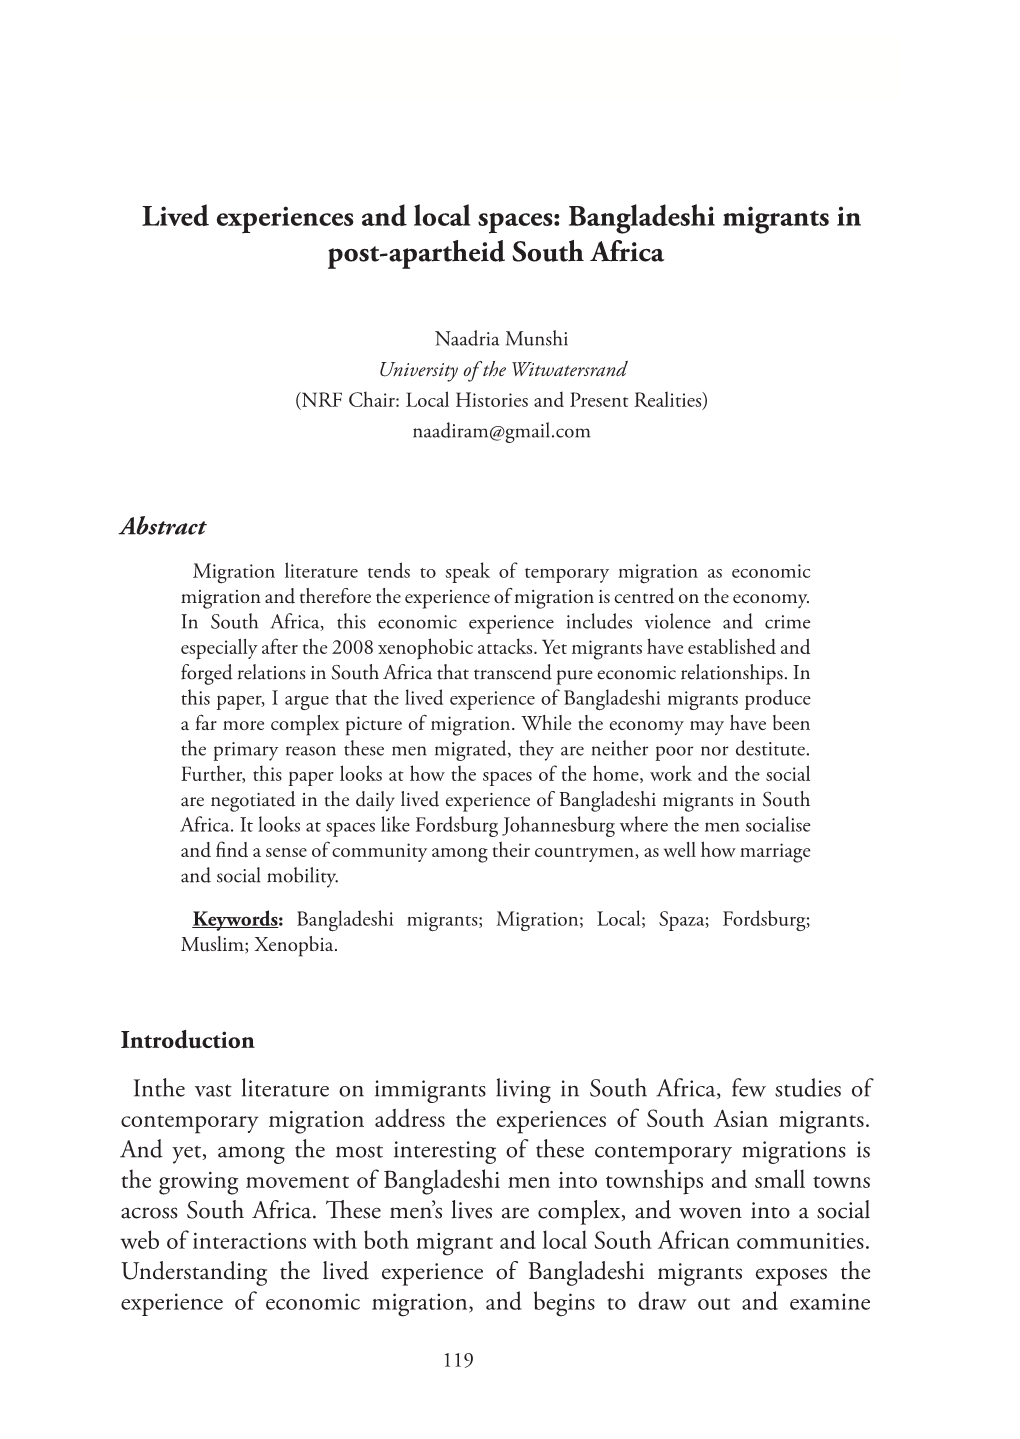 Lived Experiences and Local Spaces: Bangladeshi Migrants in Post-Apartheid South Africa